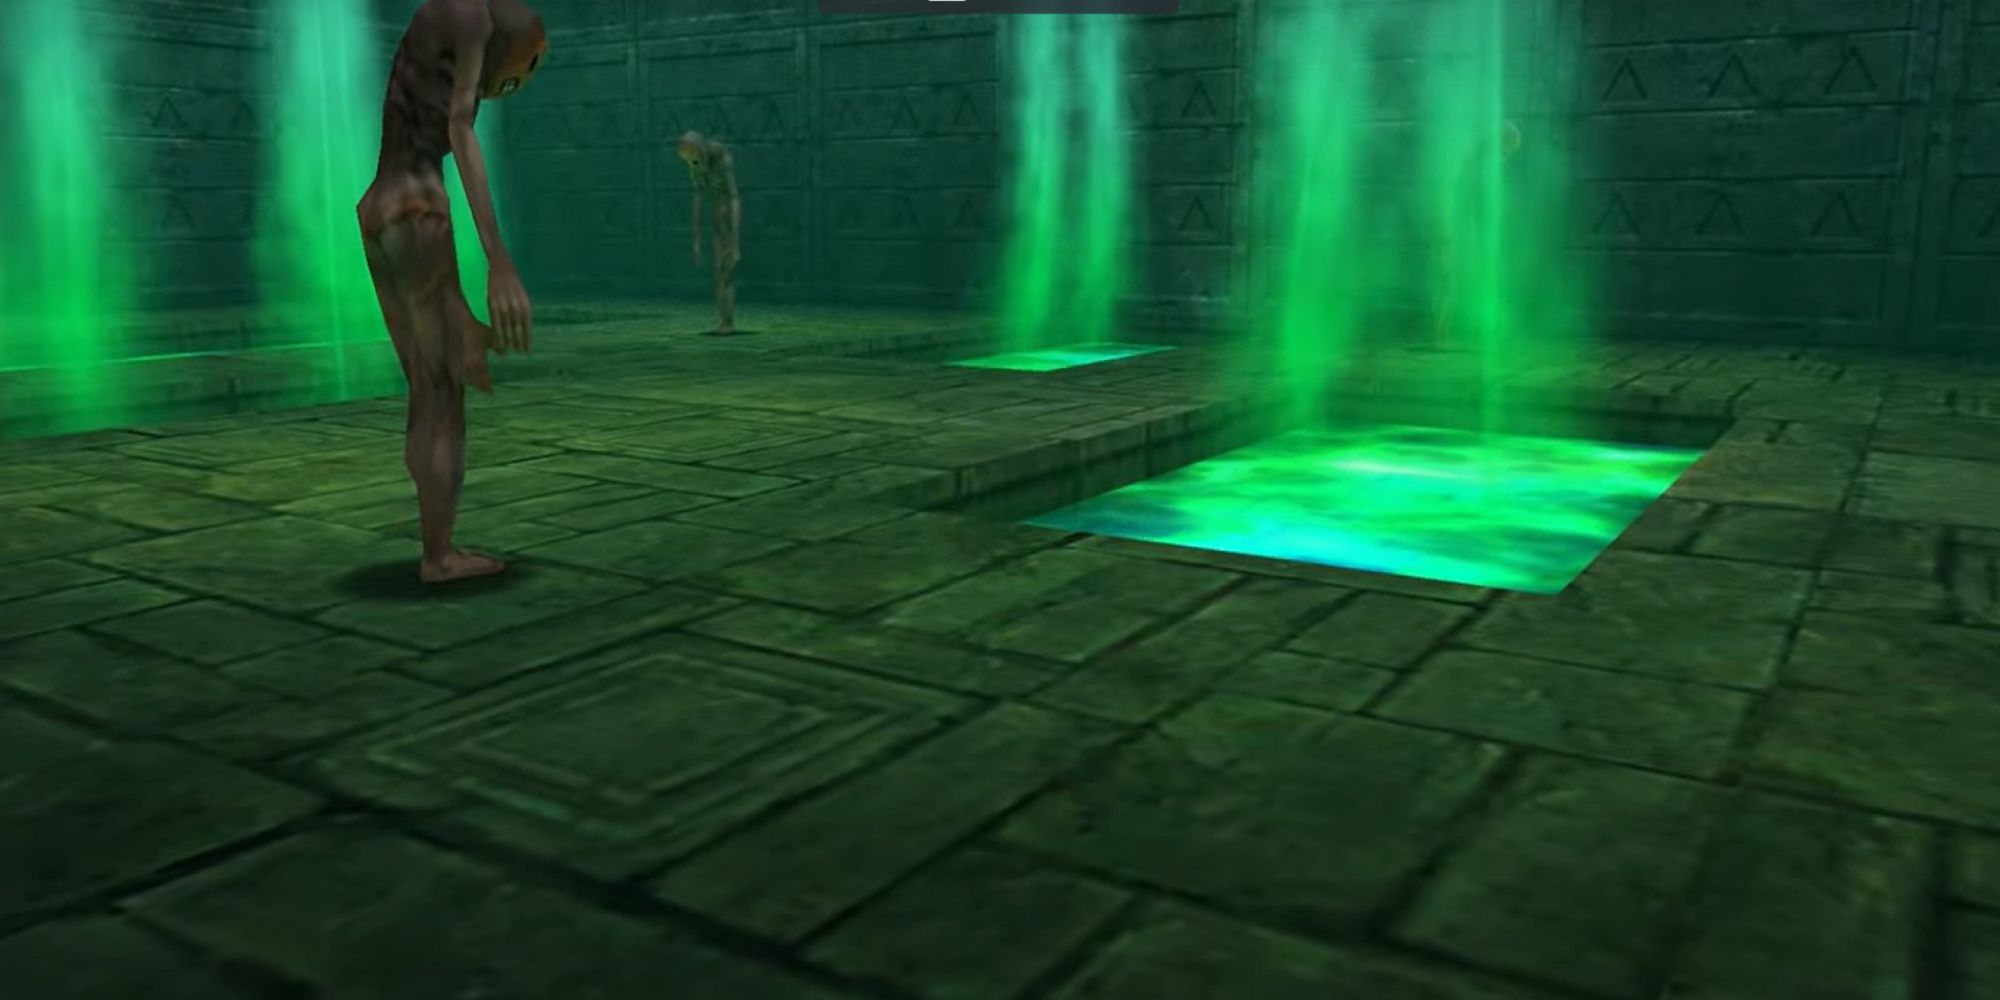 Ocarina of Time's Re-Dead with Green Goo in Hyrule Royal Family Tomb